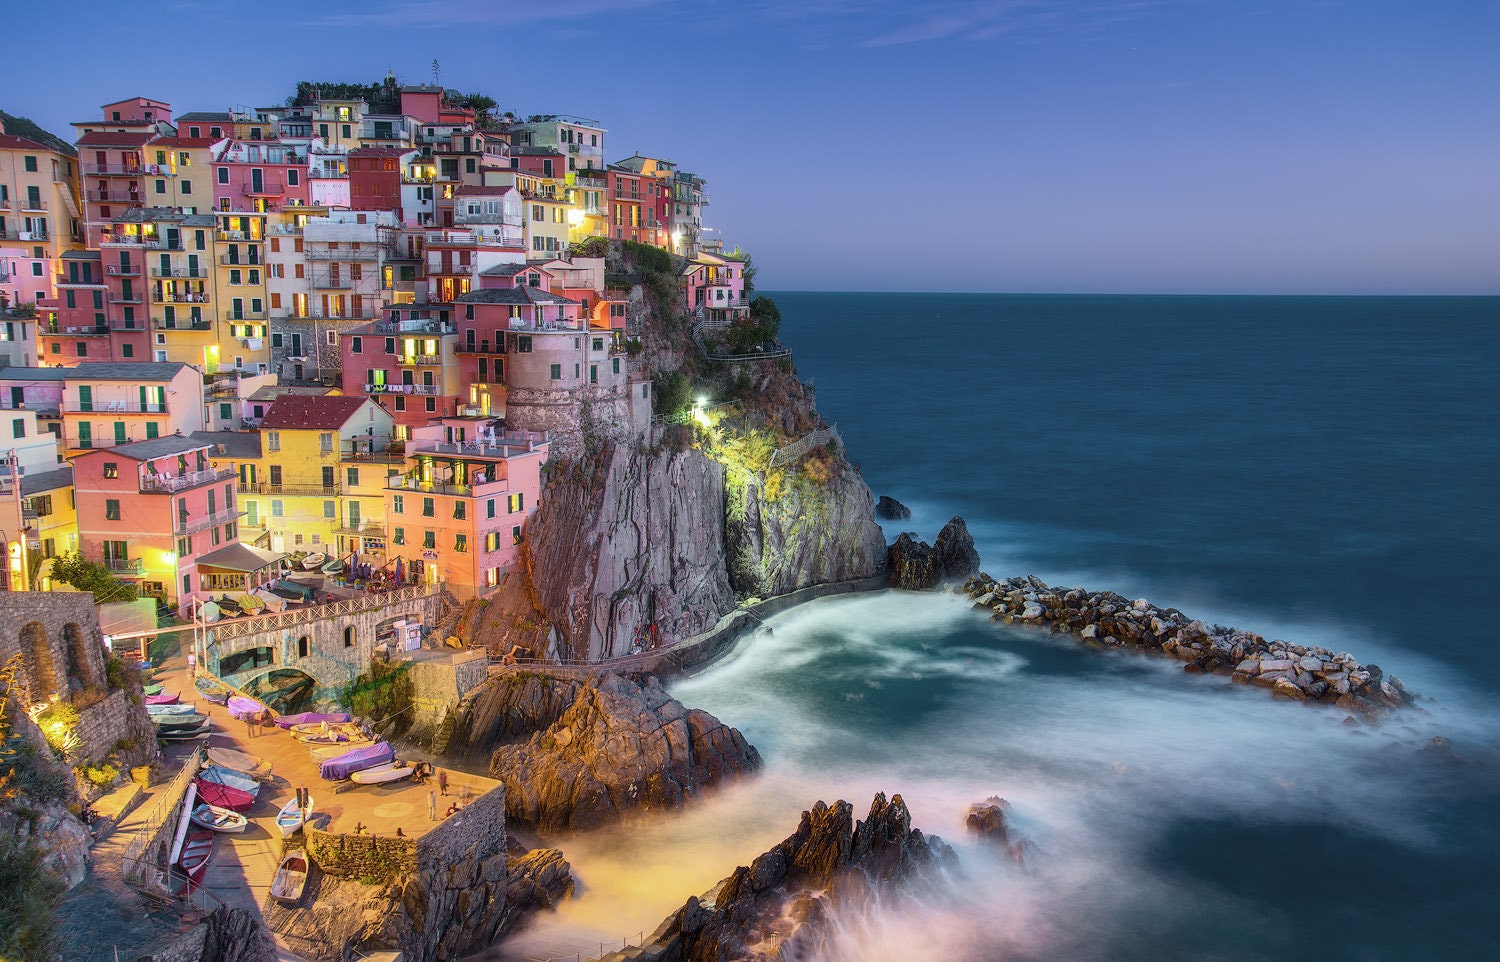 Colors Of The Night Wall Art Print - Manarola, Italy Cinque Terre Gift Mediterranean Home Decor | Travel Photography By Theworldexplored